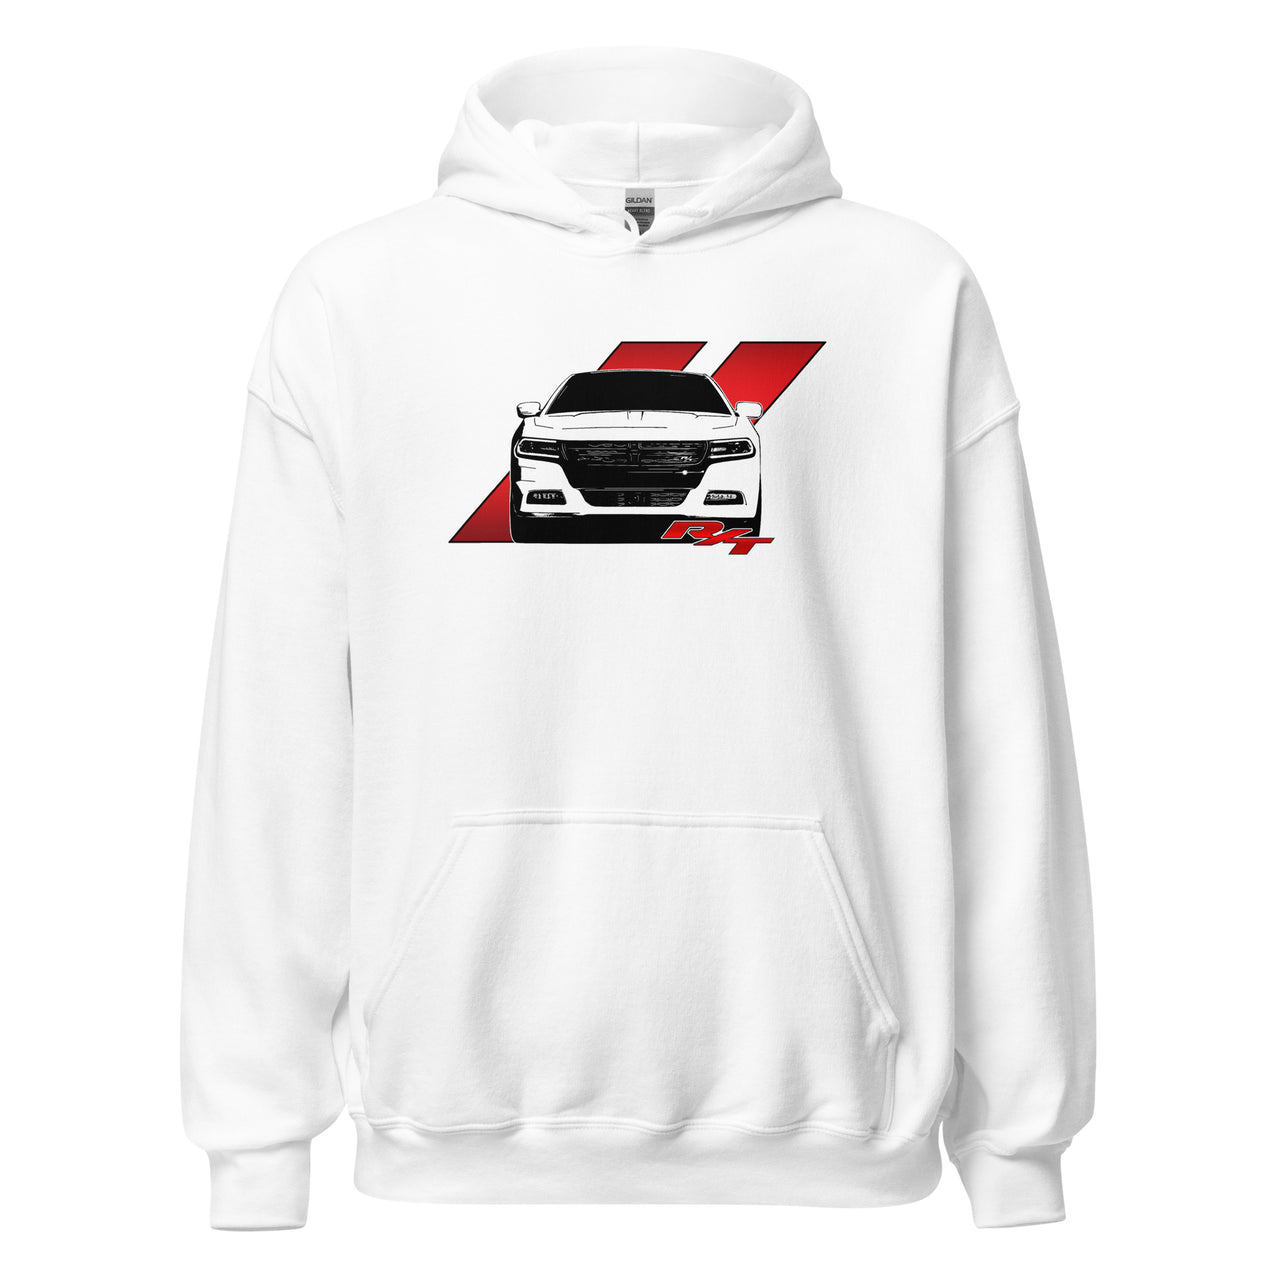 15-19 Charger R/T Hoodie in white